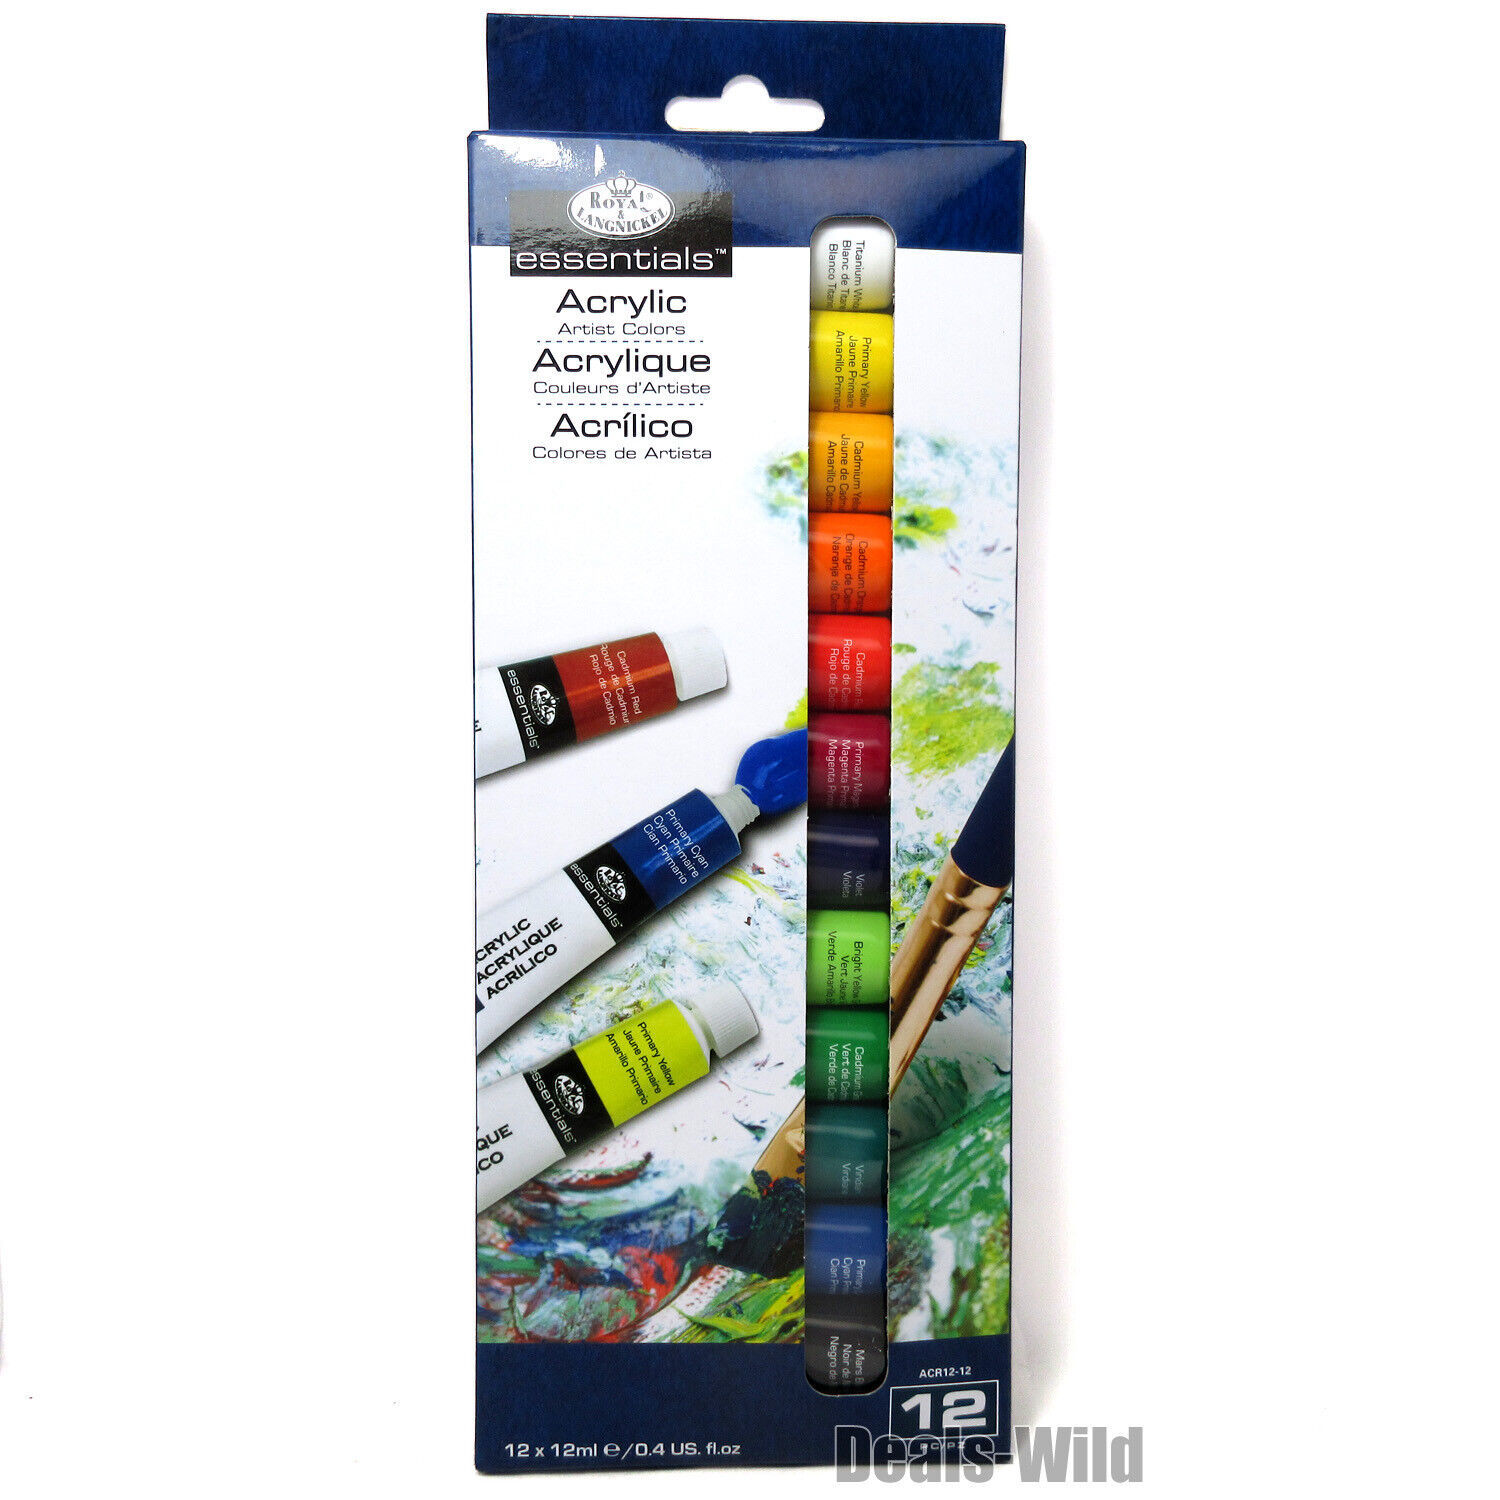 Primary image for 12 Piece Acrylic Paint Set Artist Colors Royal & Langnickel Essential